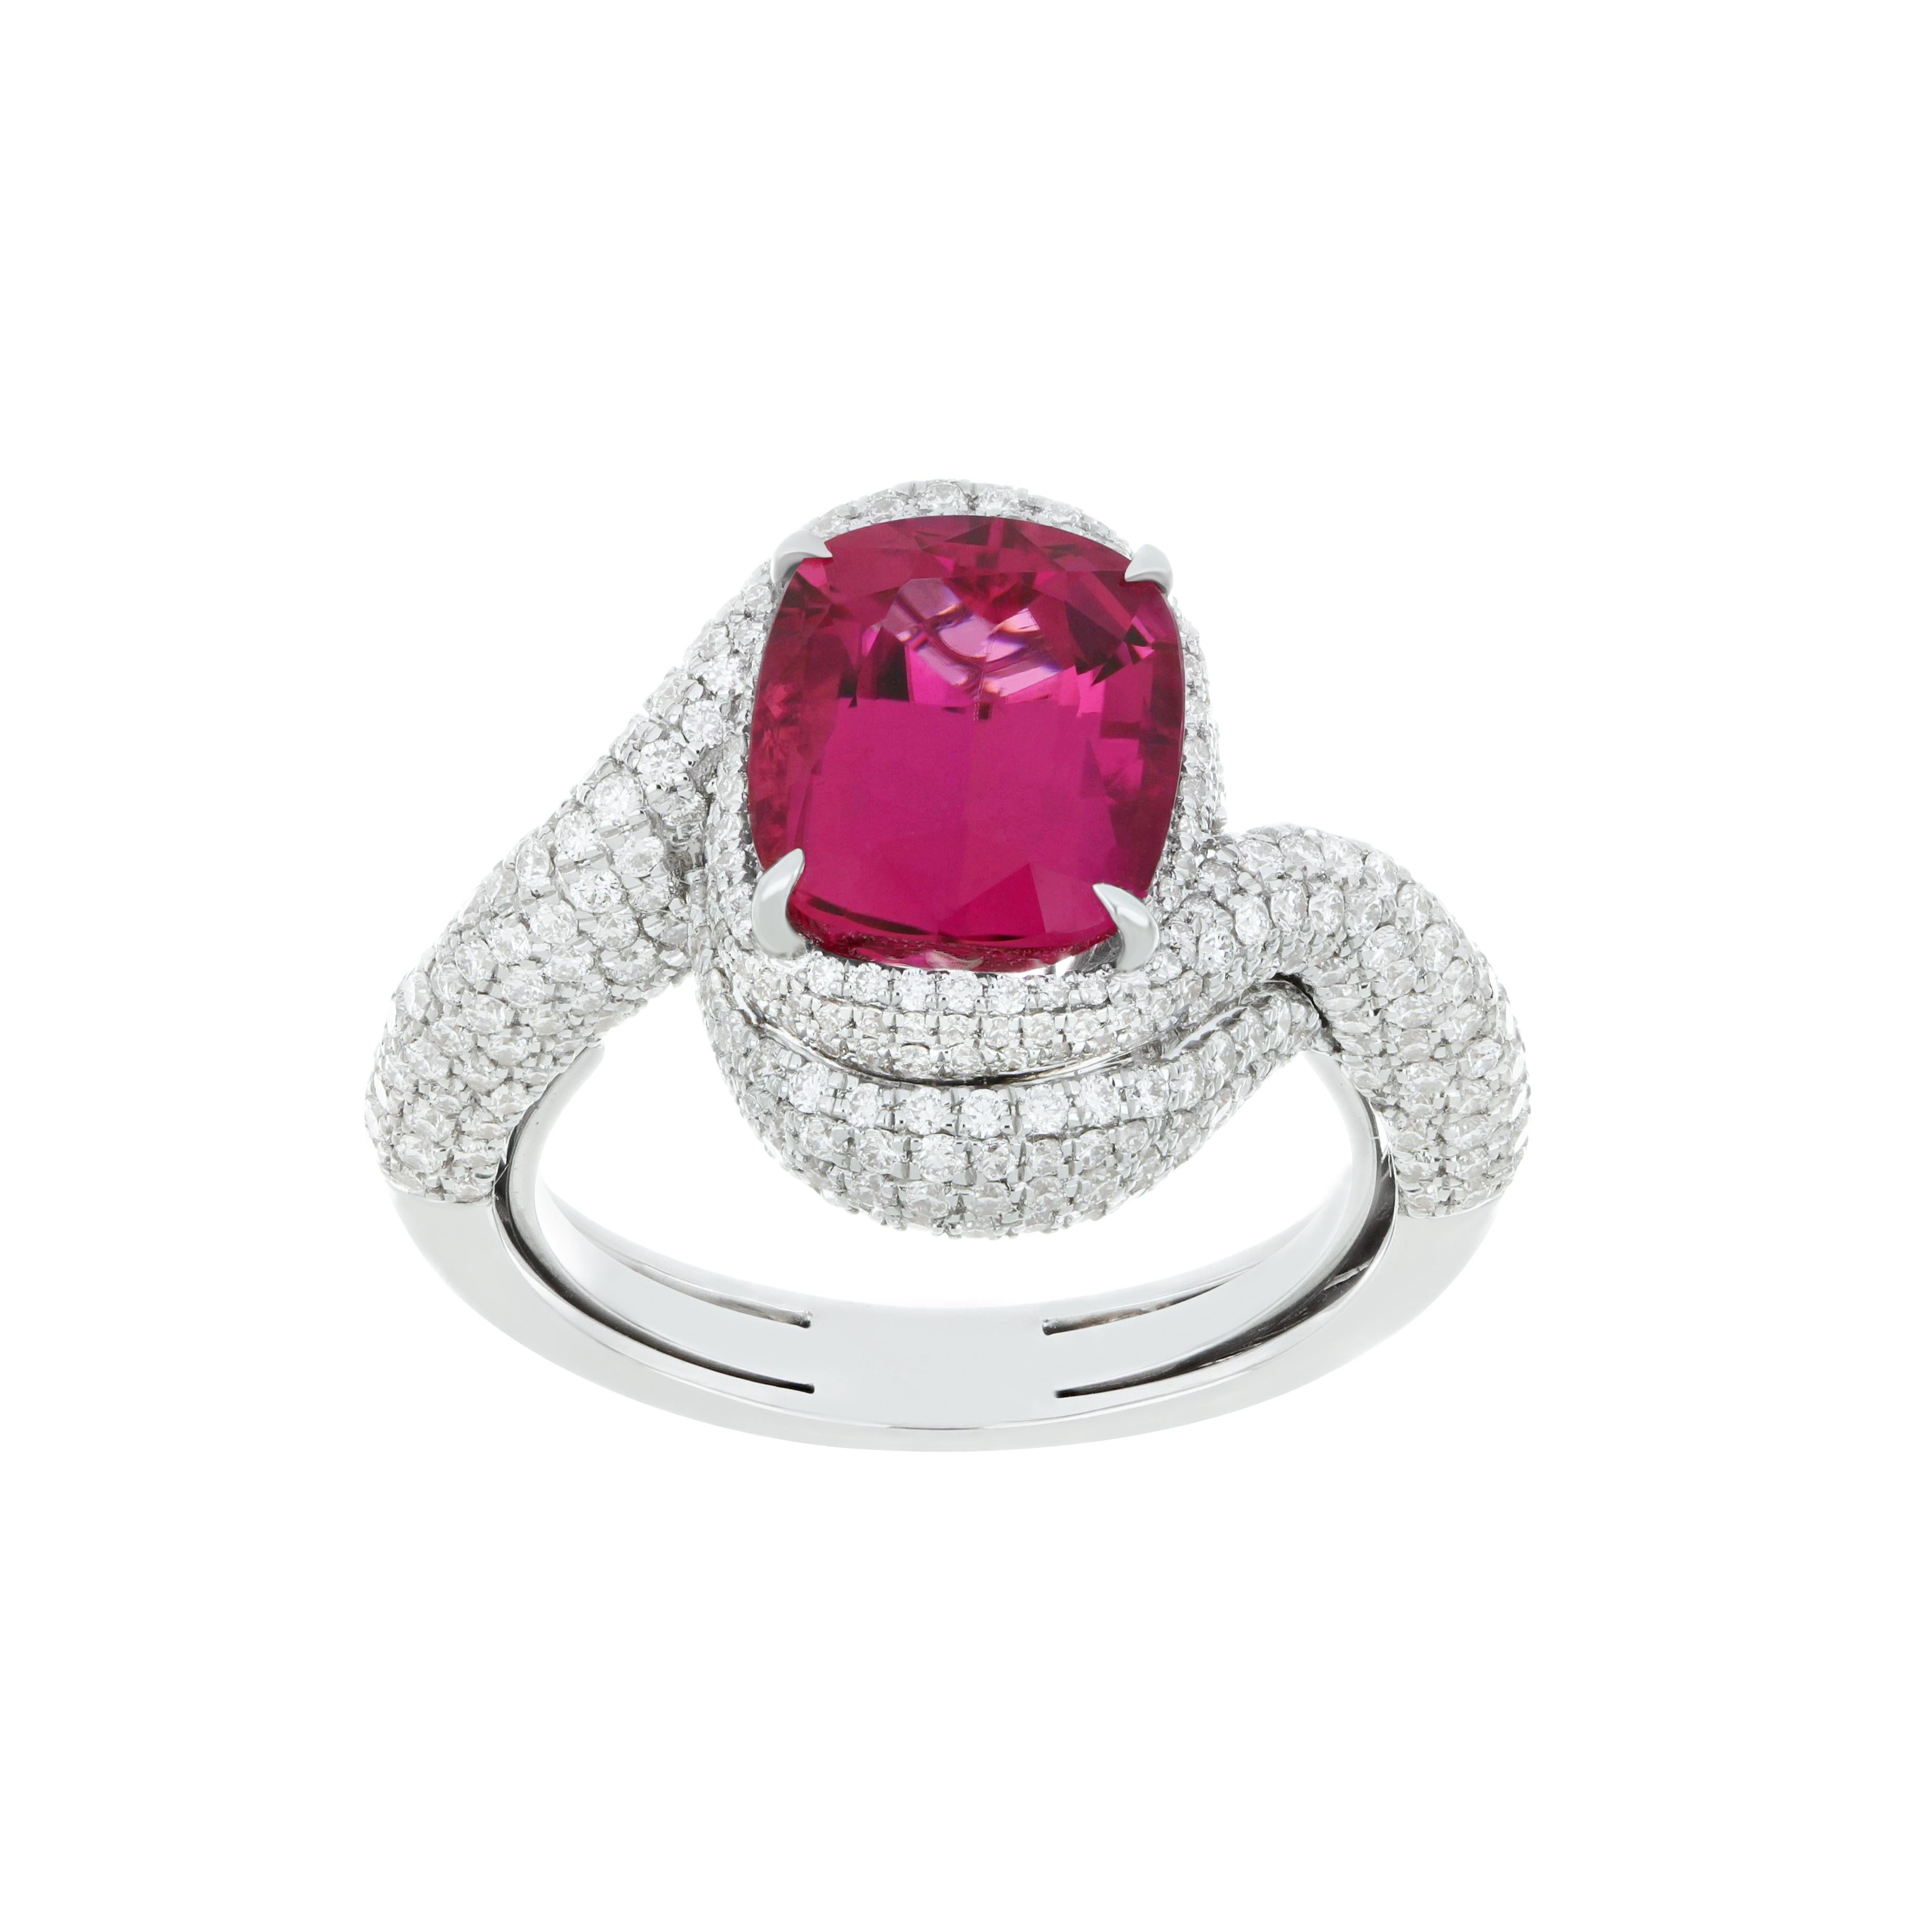 Elegant and exquisitely detailed 18K White Gold Ring, with 4.05Cts Cushion Round Corner Shape Rubellite set in center and Surrounded by Micro pave Diamonds, weighing approx. 1.7 CT's. total carat weight to further enhance the beauty of the ring.